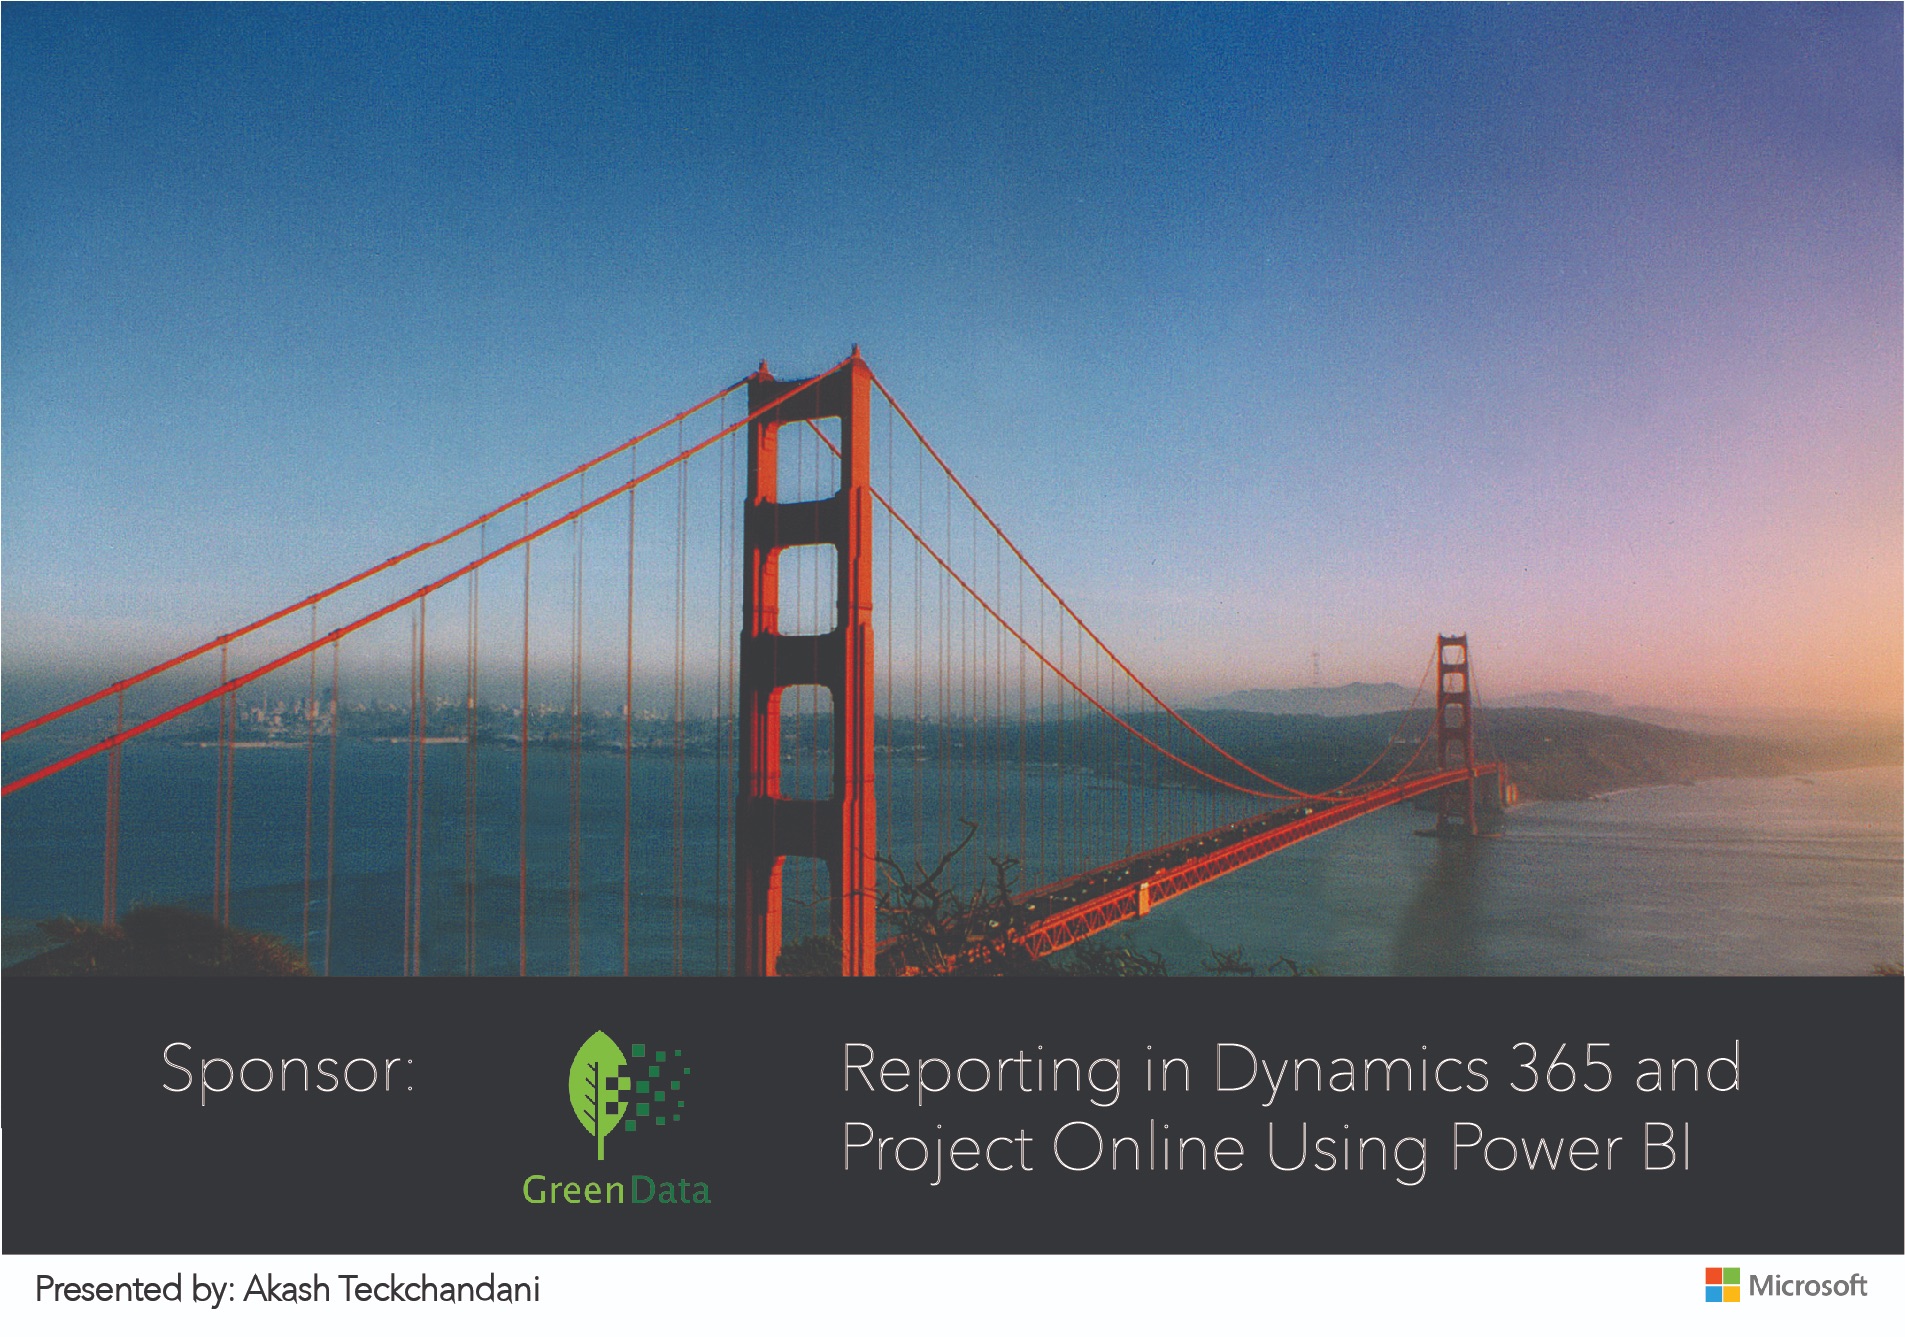 Reporting in Dynamics 365 and Project Online Using Power BI presented by Akash Teckchandani